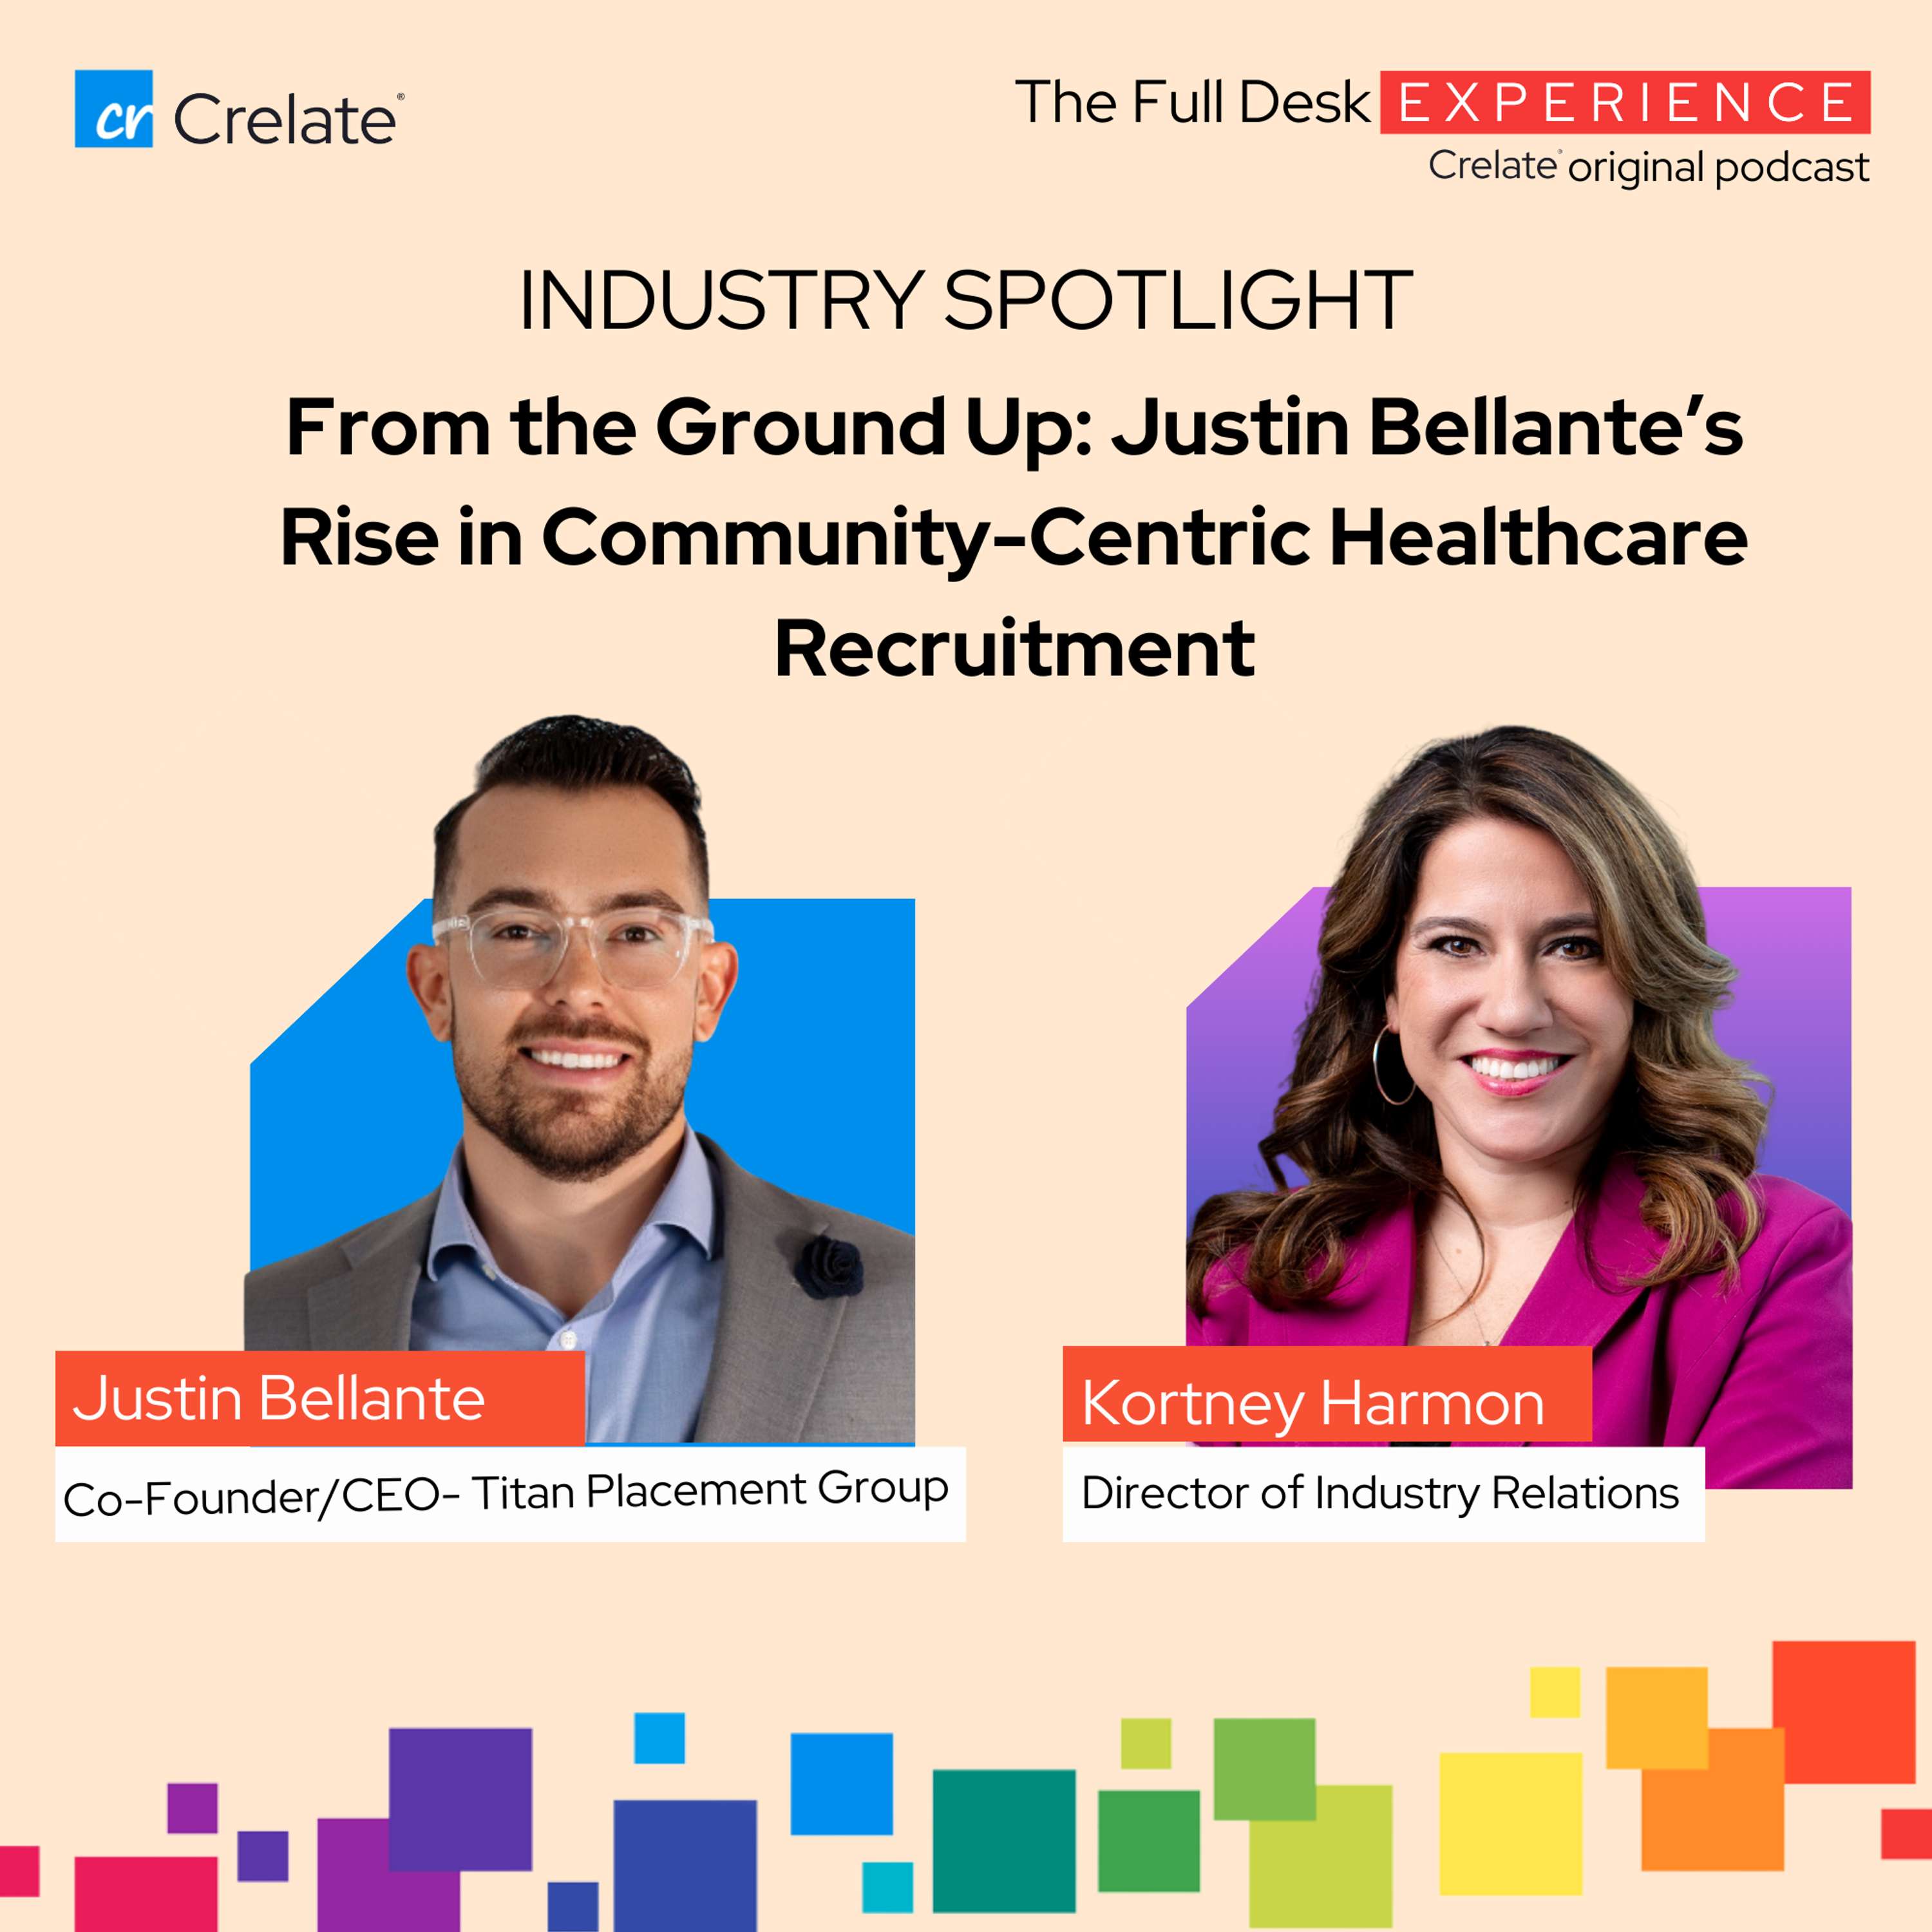 Industry Spotlight | From the Ground Up: Justin Bellante’s Rise in Community-Centric Healthcare Recruitment